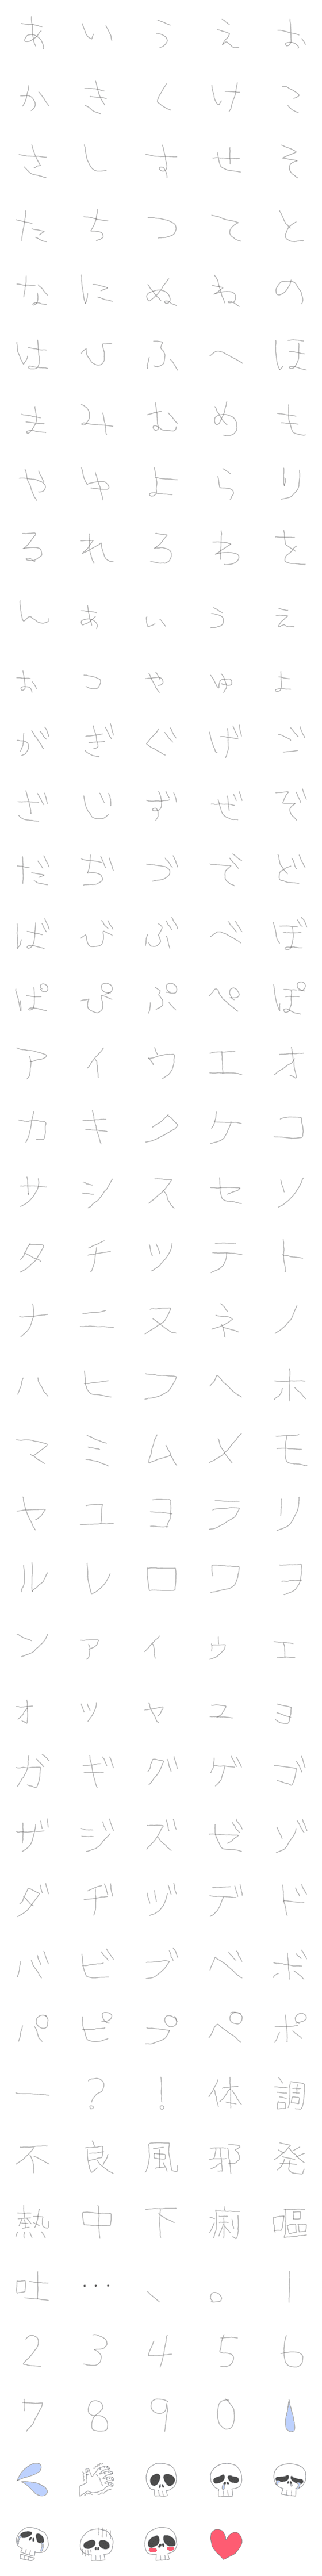 [LINE絵文字]体調悪い文字の画像一覧